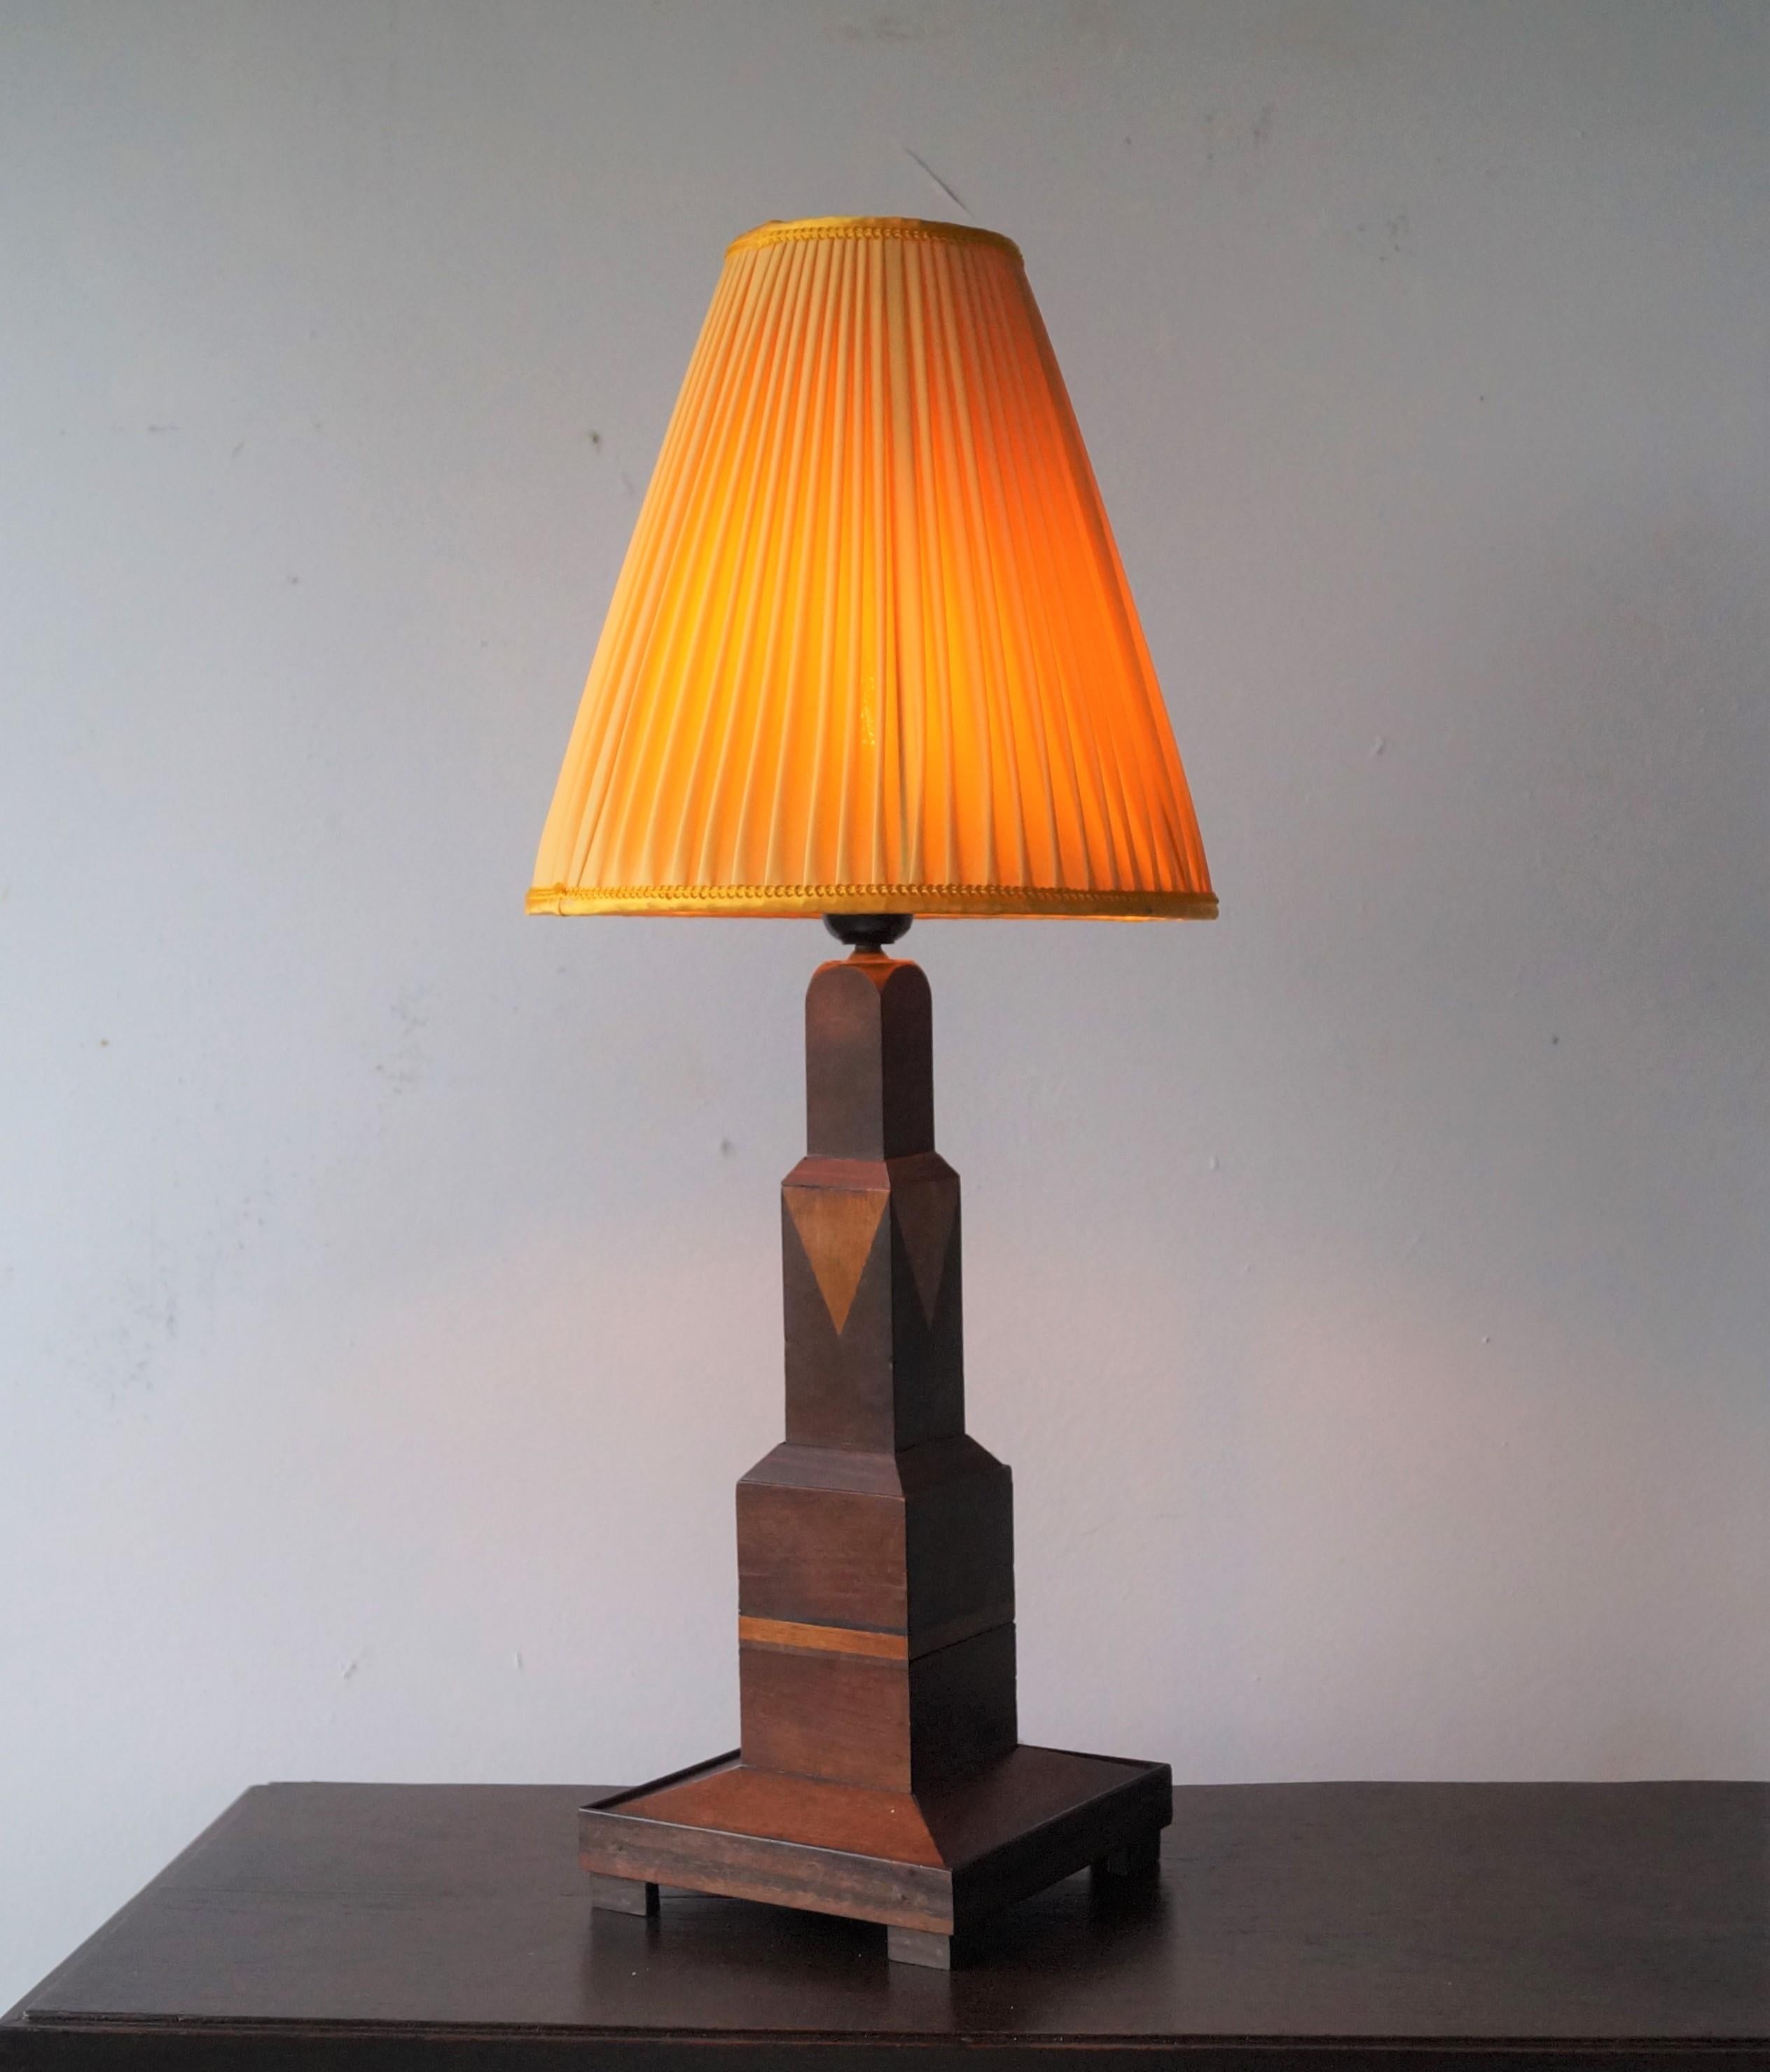 Unique and eye catching modernist table lamp, in a stepped design, entirely made of wood, mostly mahogany wood with inlay of teak and coromandel.
The pictures illustrate well how this lamp blends perfectly with modernist and art deco furniture. The